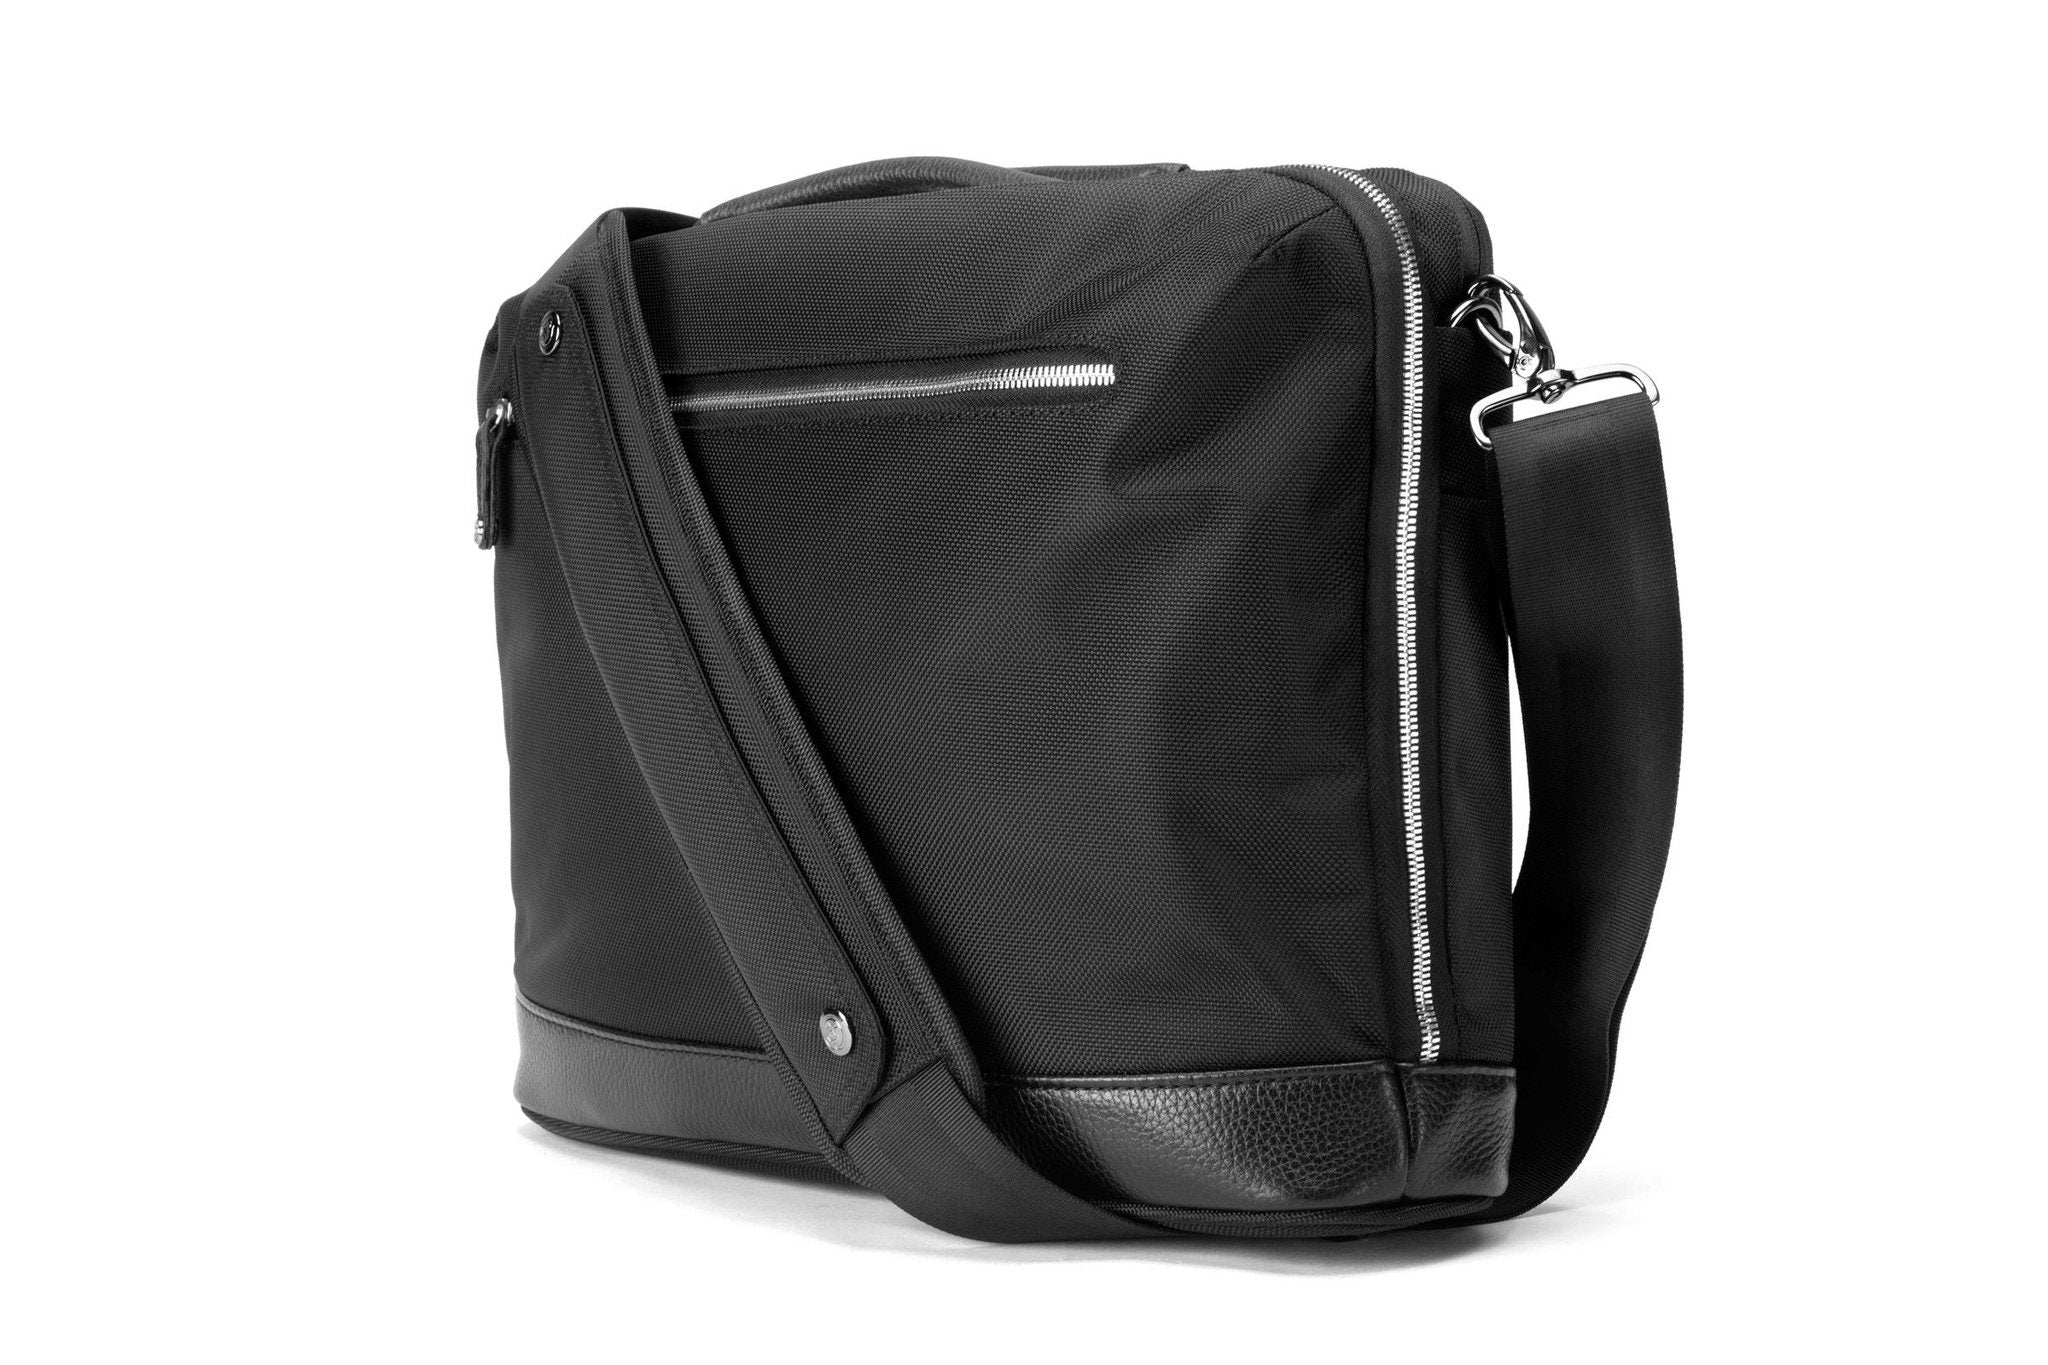 Modern laptop bags for any MacBook, MacBook Pro or PC - booqbags